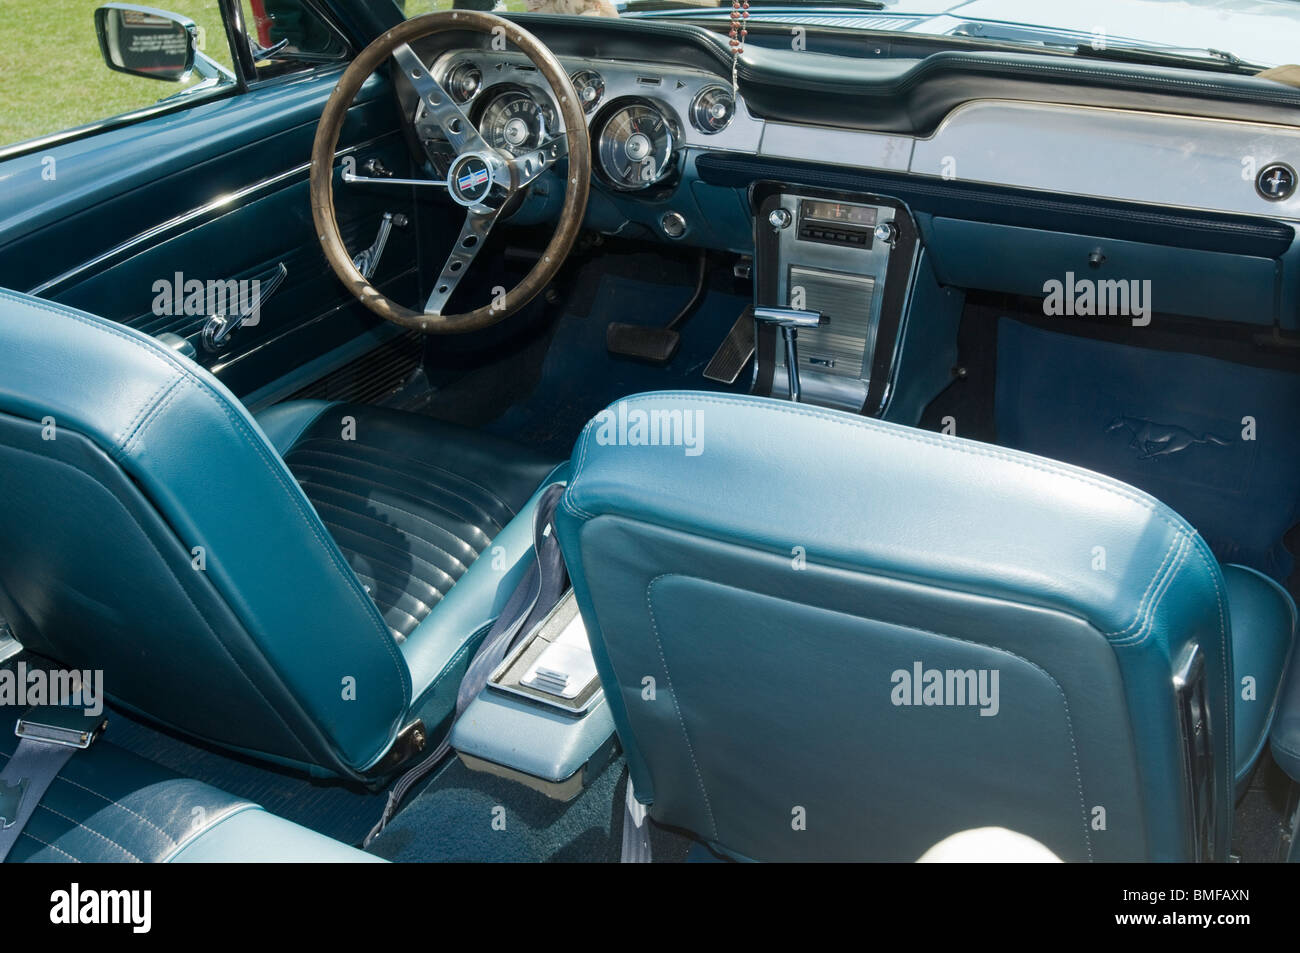 United Kingdom, England - Interior of a Ford Mustang at Eastbourne's Magnificent Motors car show. EDITORIAL USE ONLY. Stock Photo